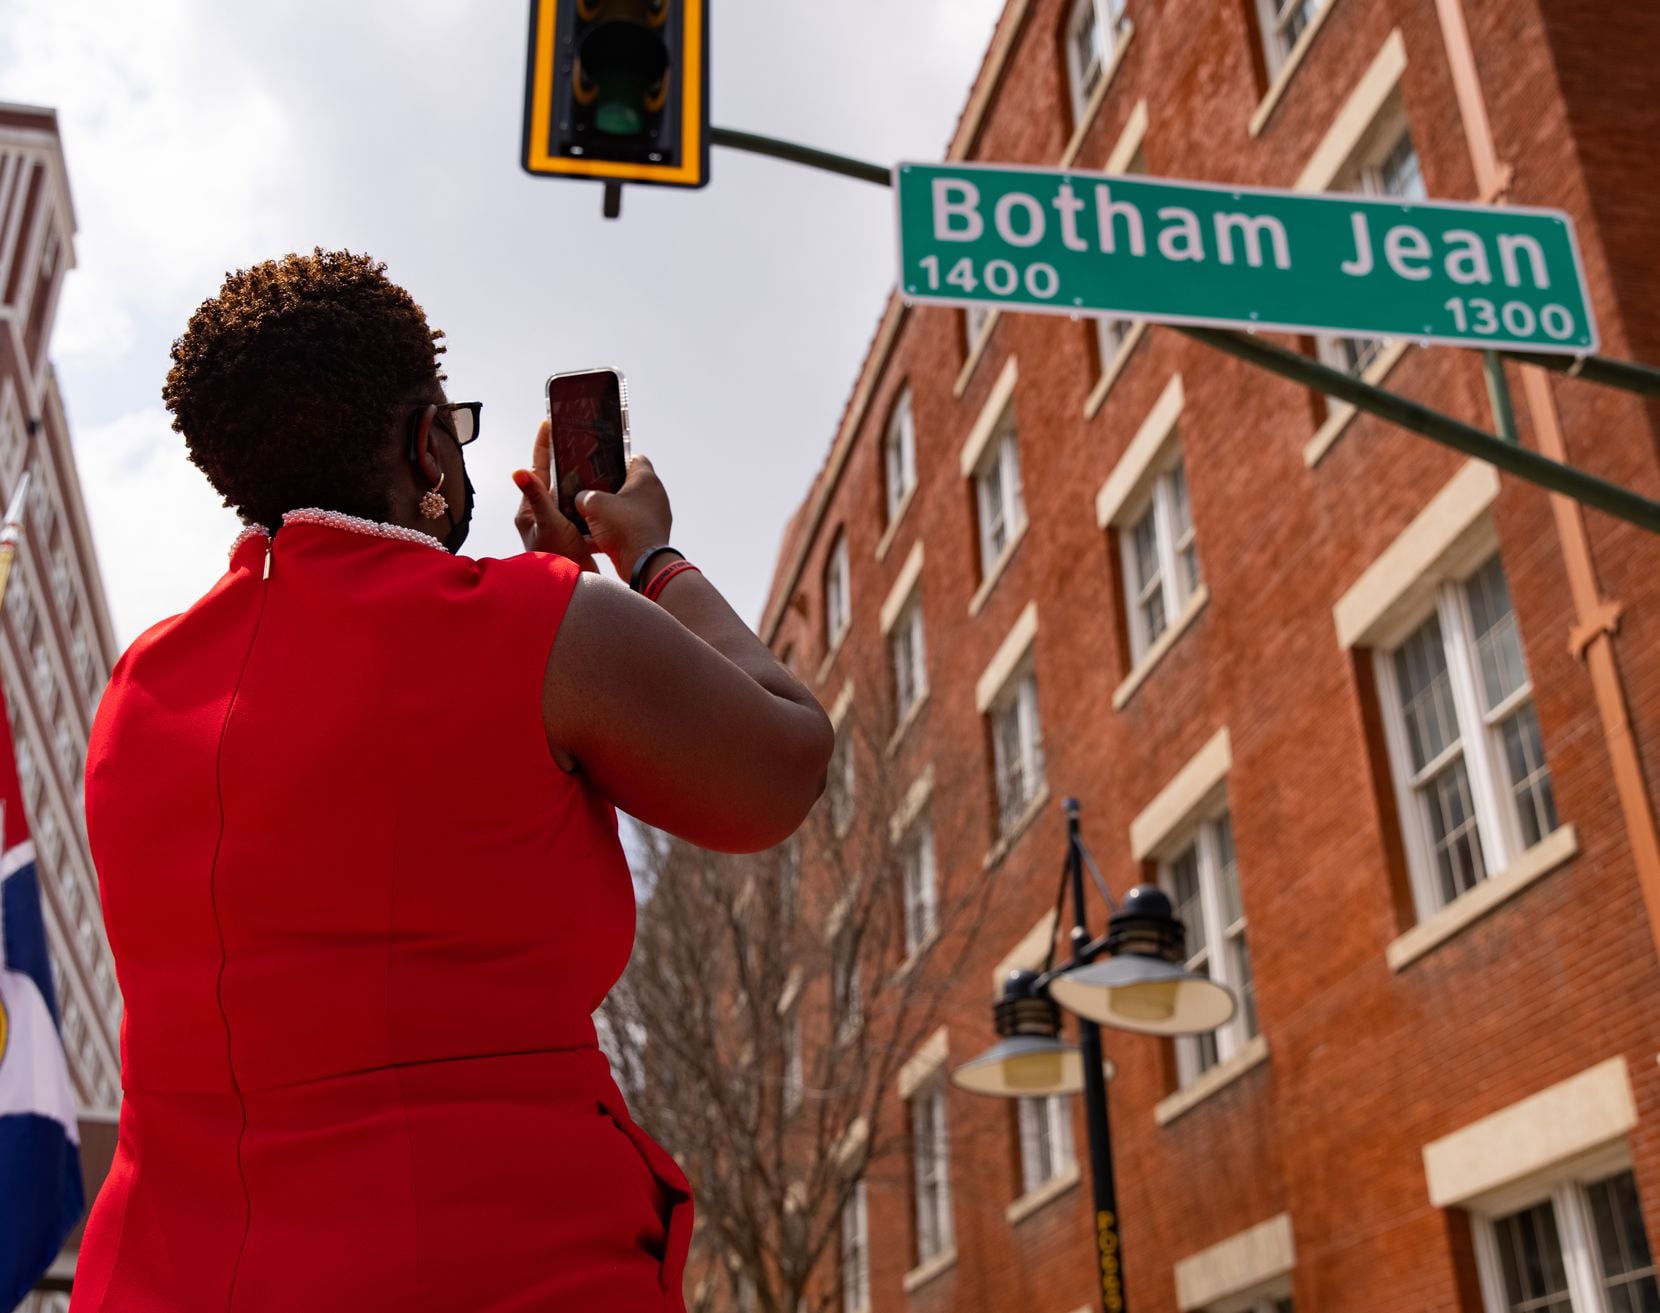 Botham Jean's mother, Allison Jean, takes a photo of a sign bearing his name at a ceremony...